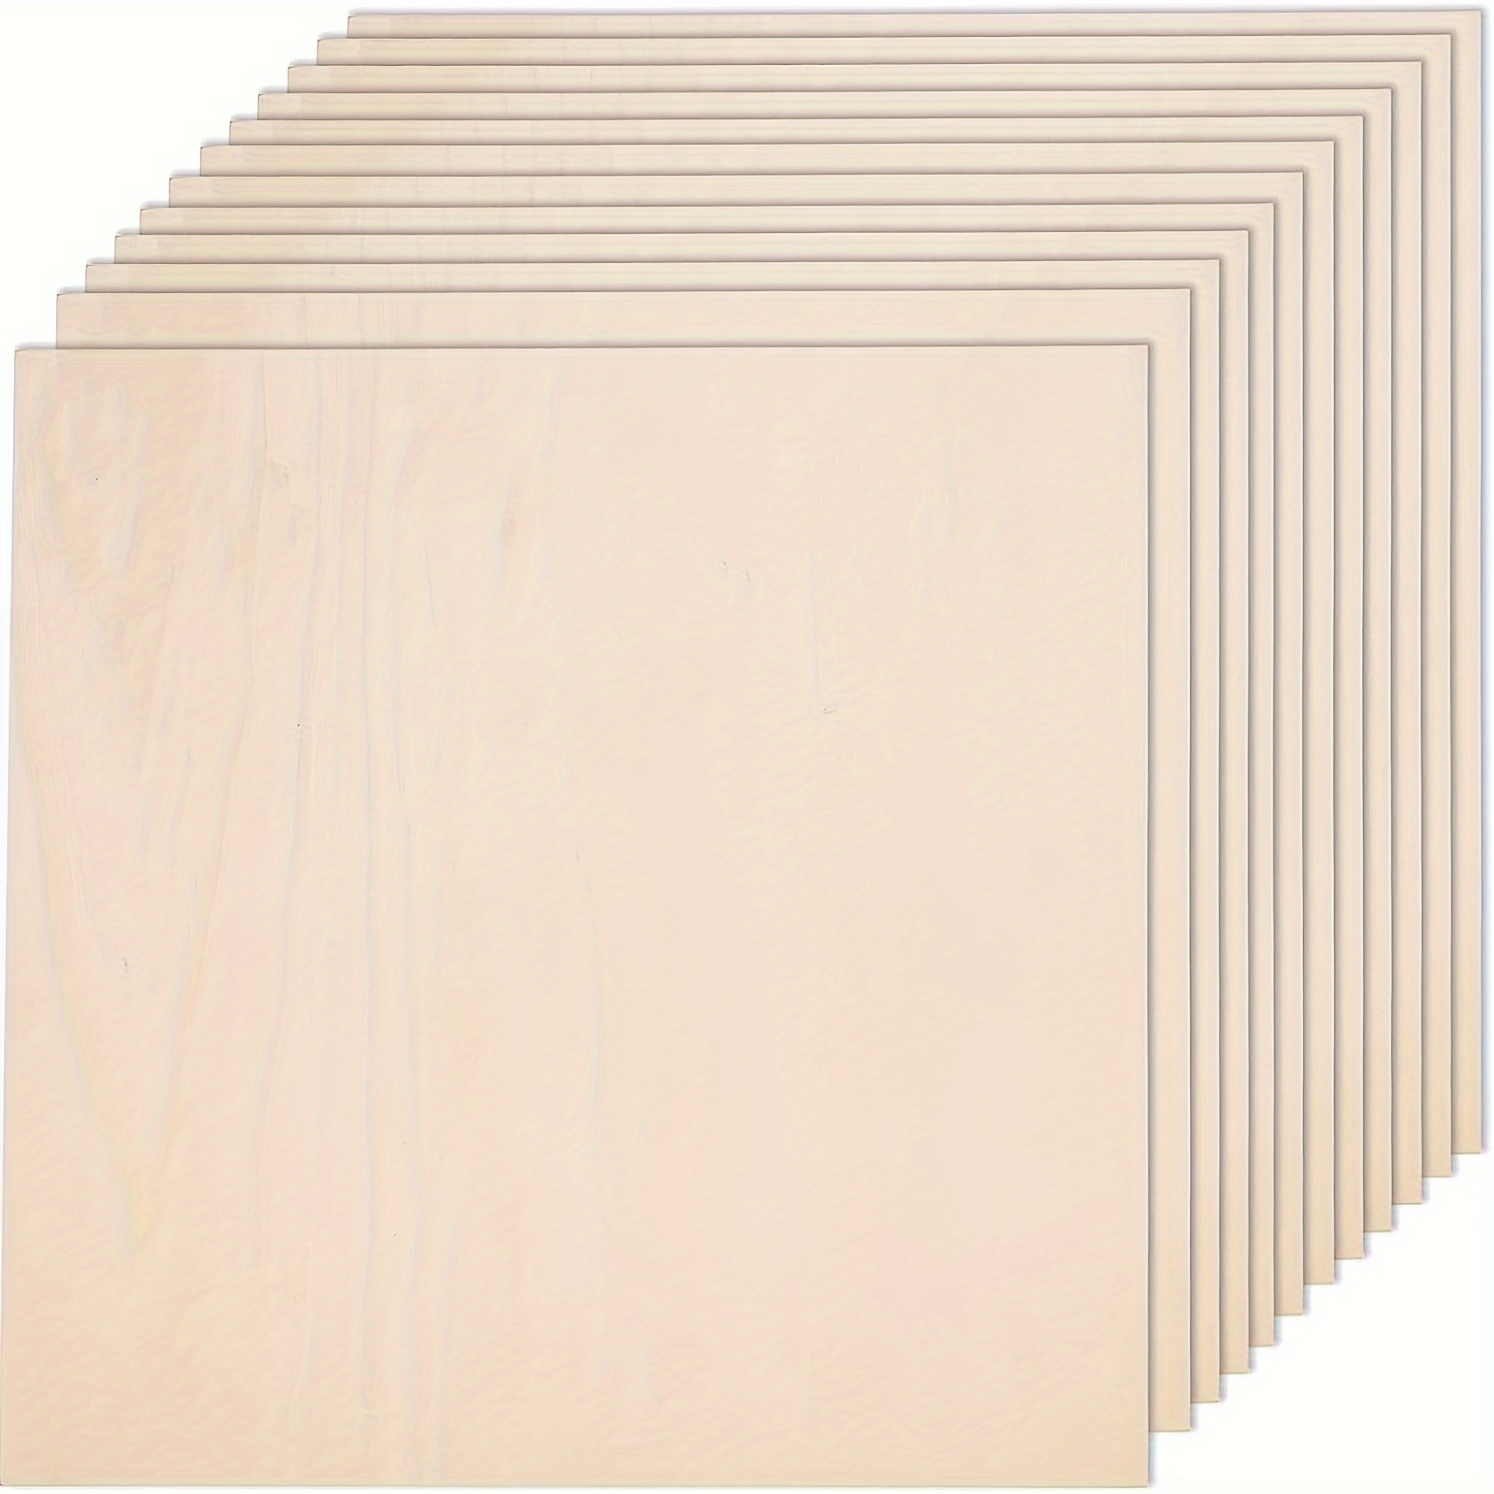 Wood craft board 1/4 inch thick